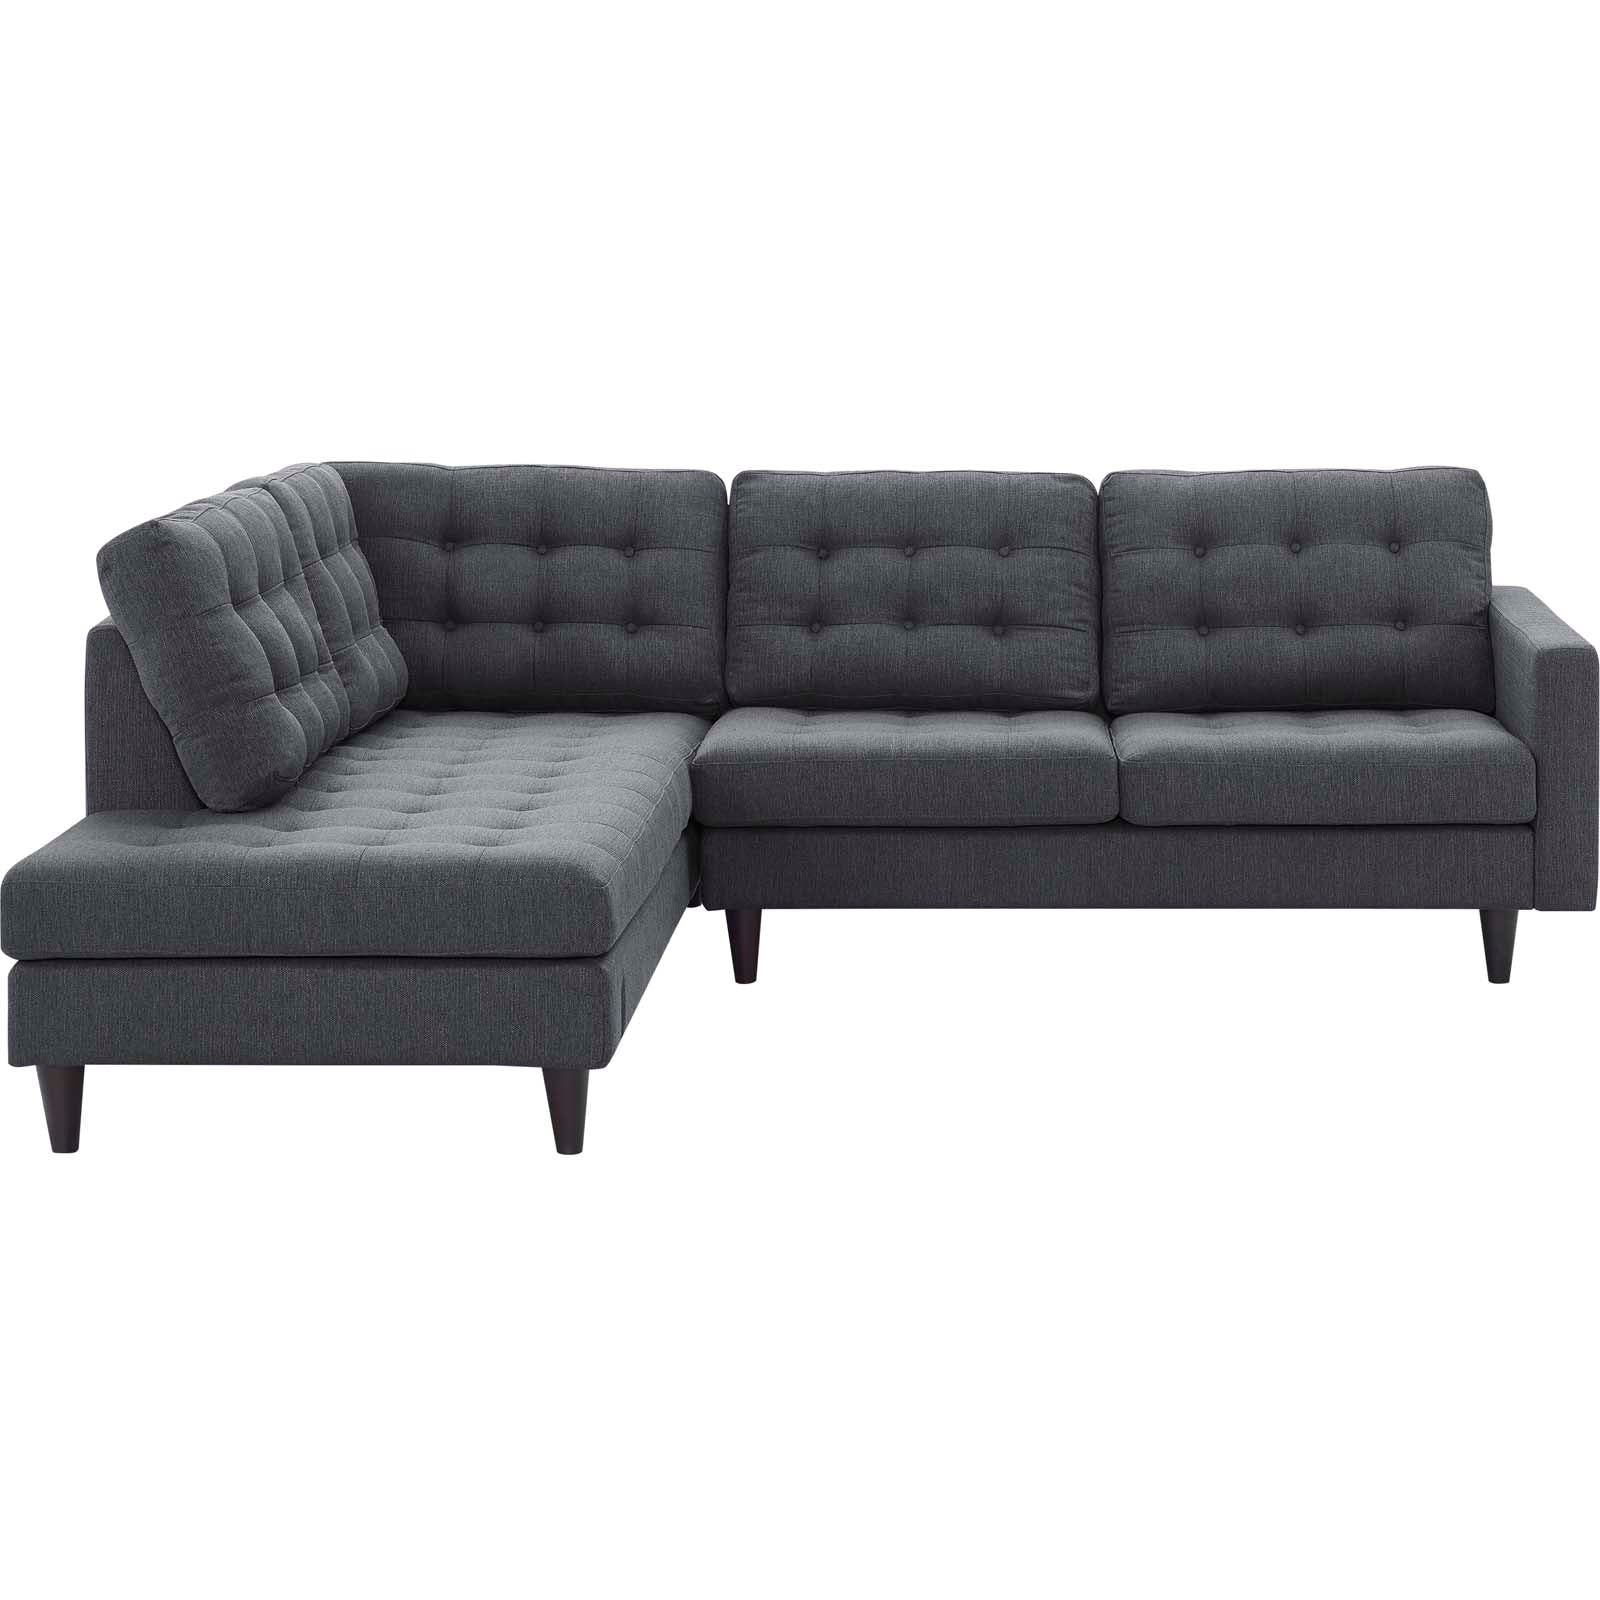 Modway Sectional Sofas - Empress 2 Piece Upholstered Fabric Left Facing Bumper Sectional Gray